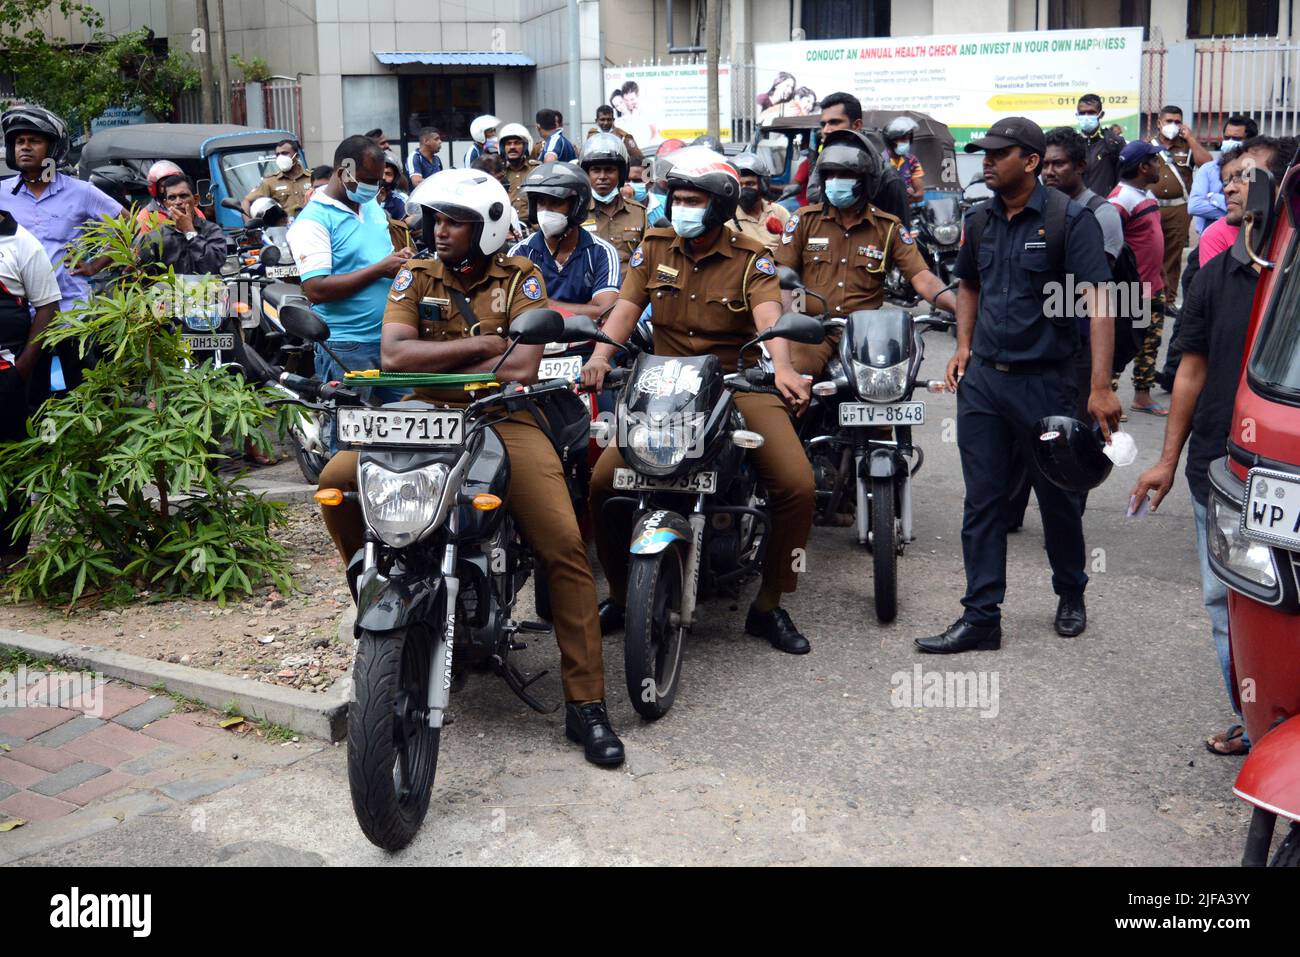 Colombo. 30th June, 2022. Police officers queue up for fuel at a fuel station in Colombo, Sri Lanka on June 30, 2022, as the country has been facing crippling fuel shortages. Credit: Gayan Sameera/Xinhua/Alamy Live News Stock Photo